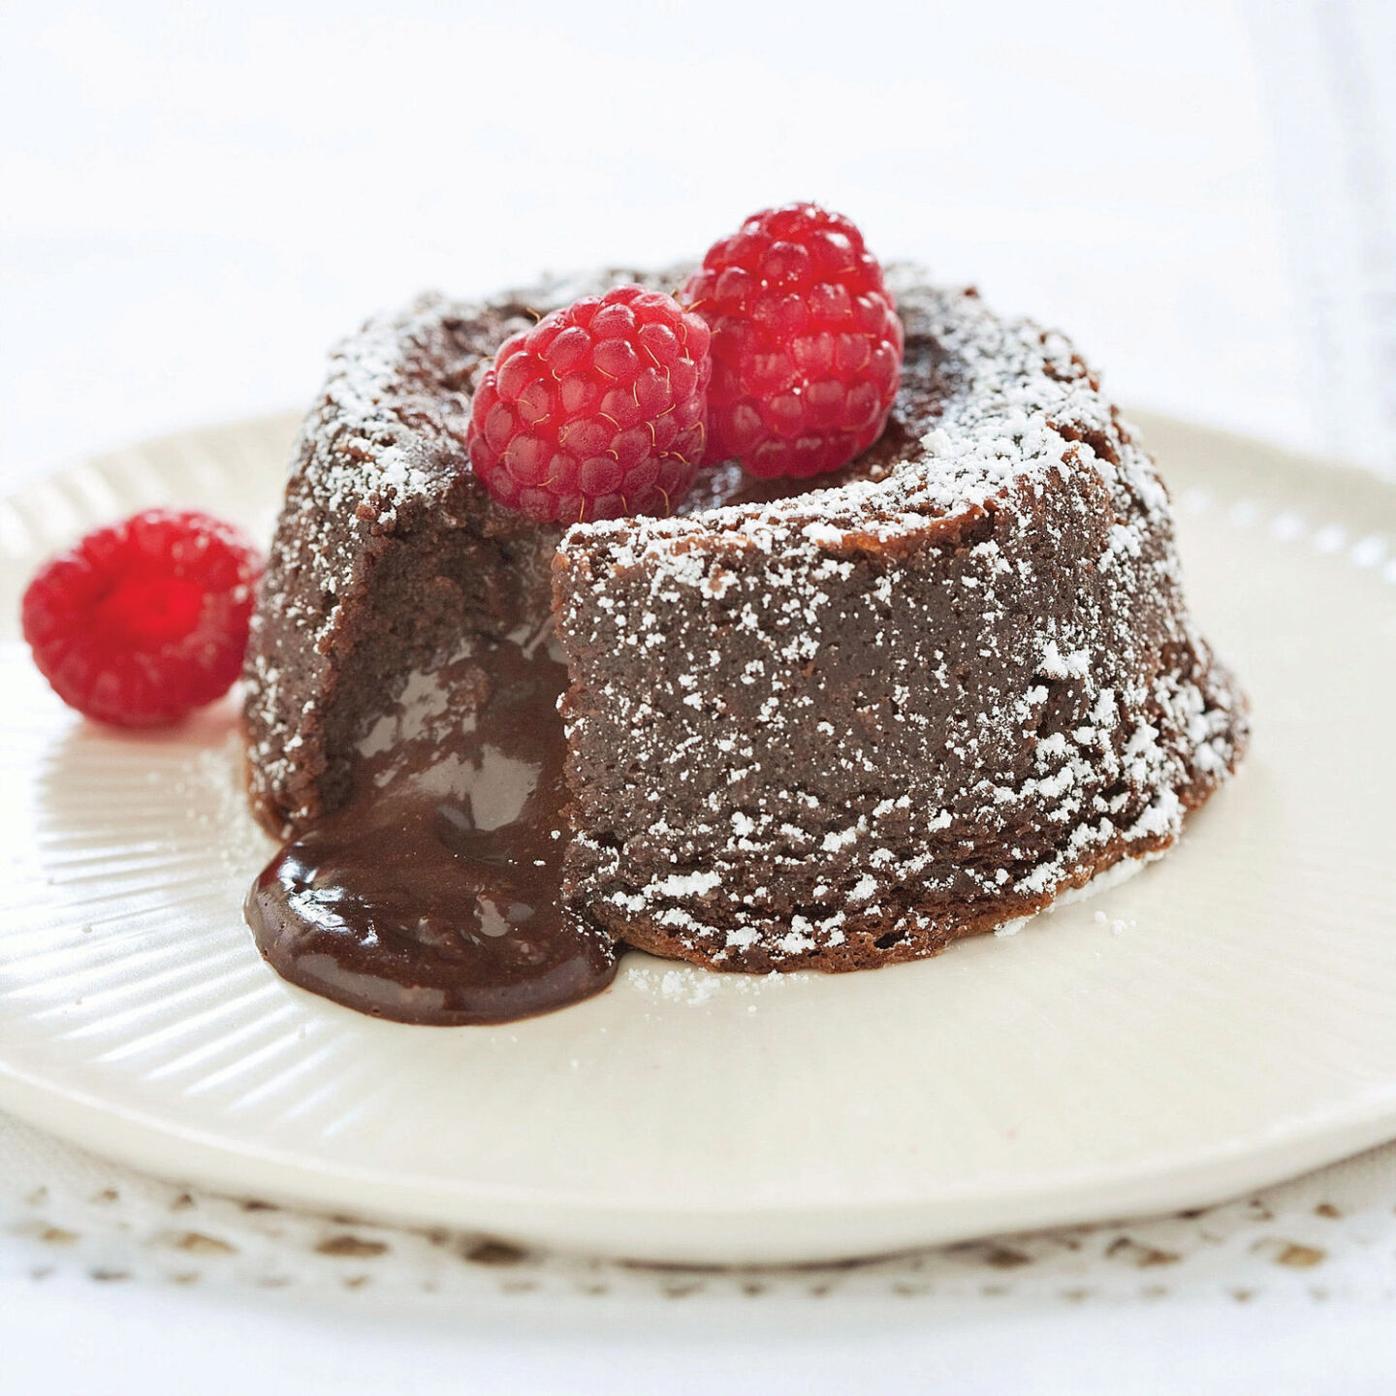 Molten chocolate cake is intense and buttery